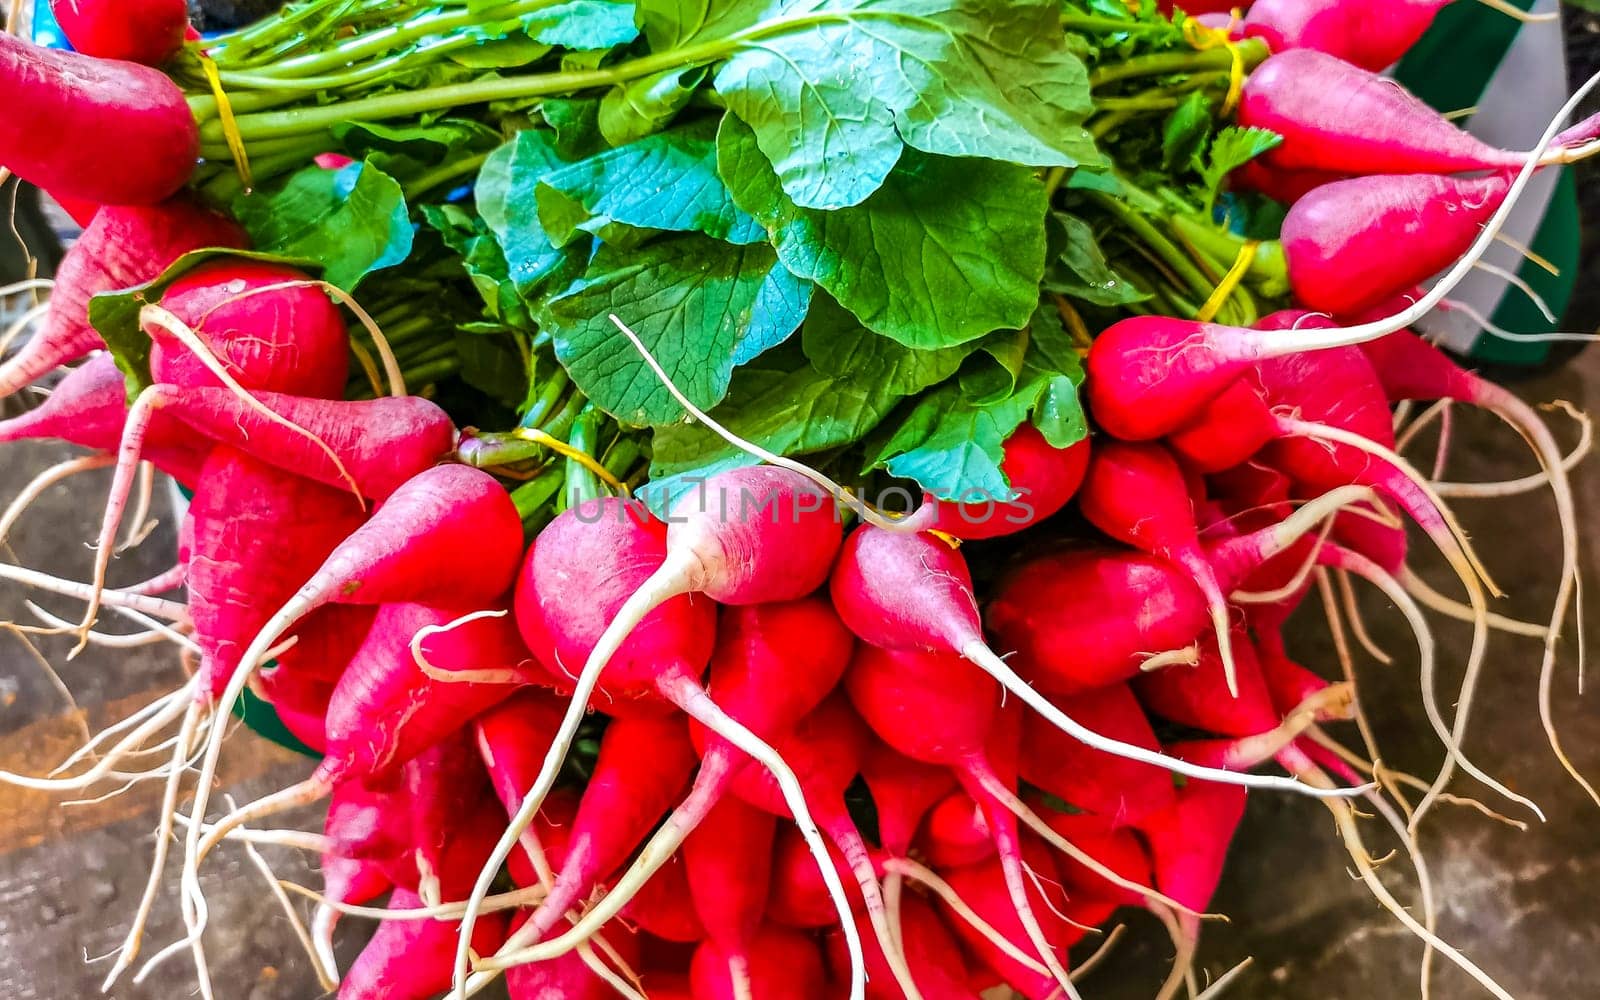 Redies radish radishes vegetables on the market in Mexico. by Arkadij